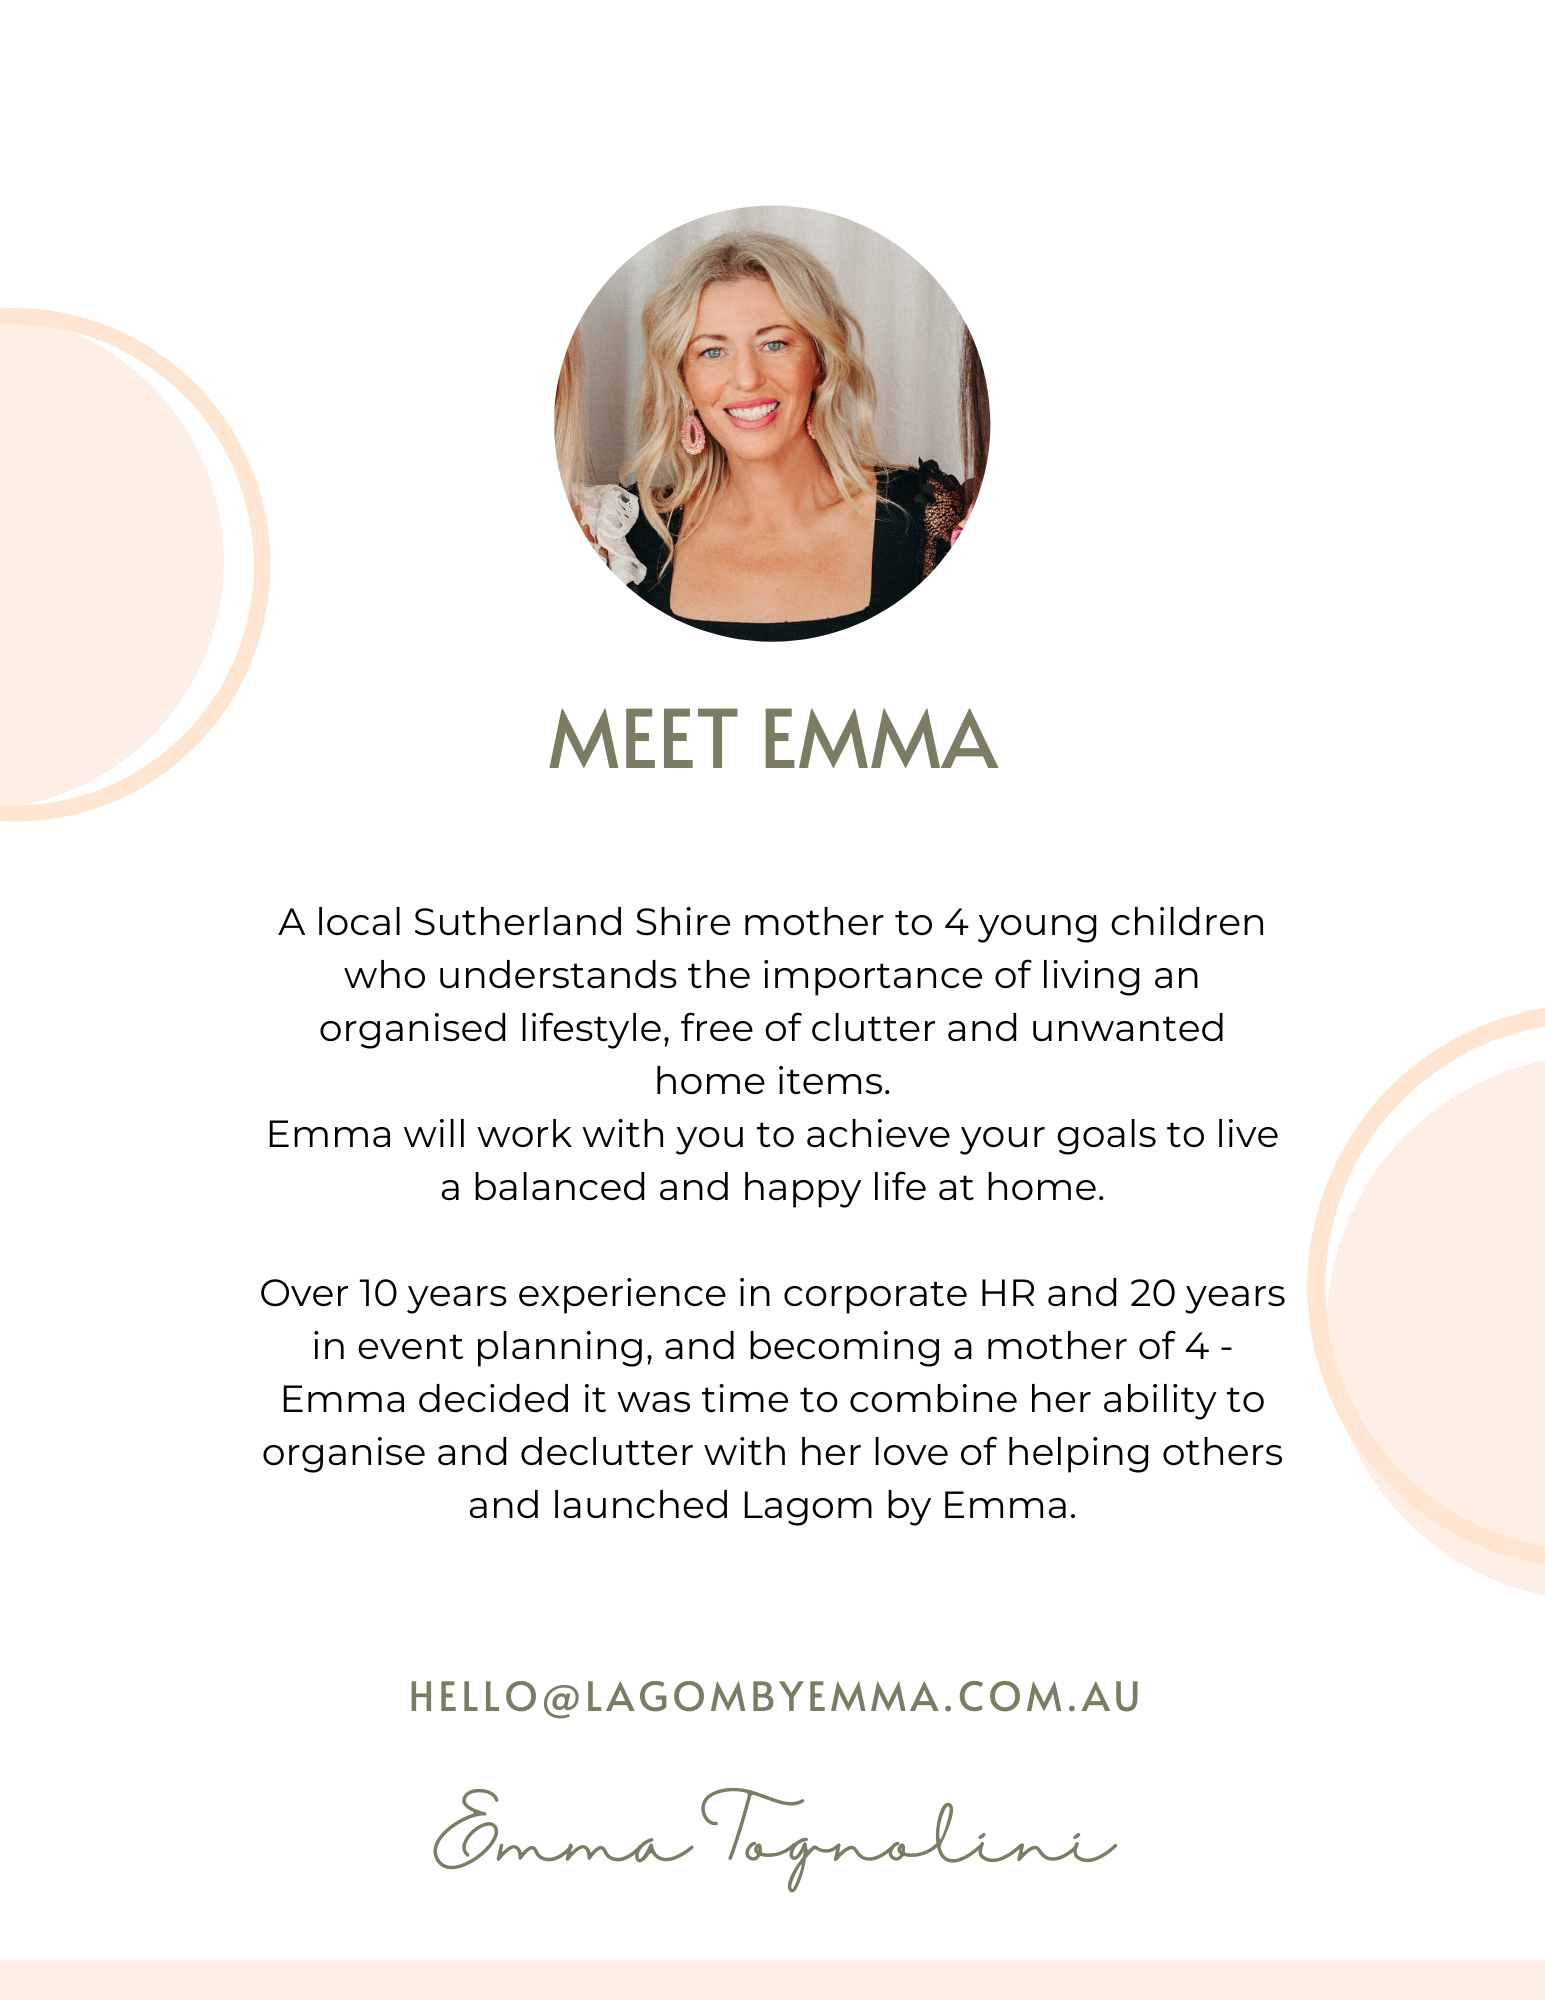 Lagom by Emma – Home Organisation & Decluttering Service